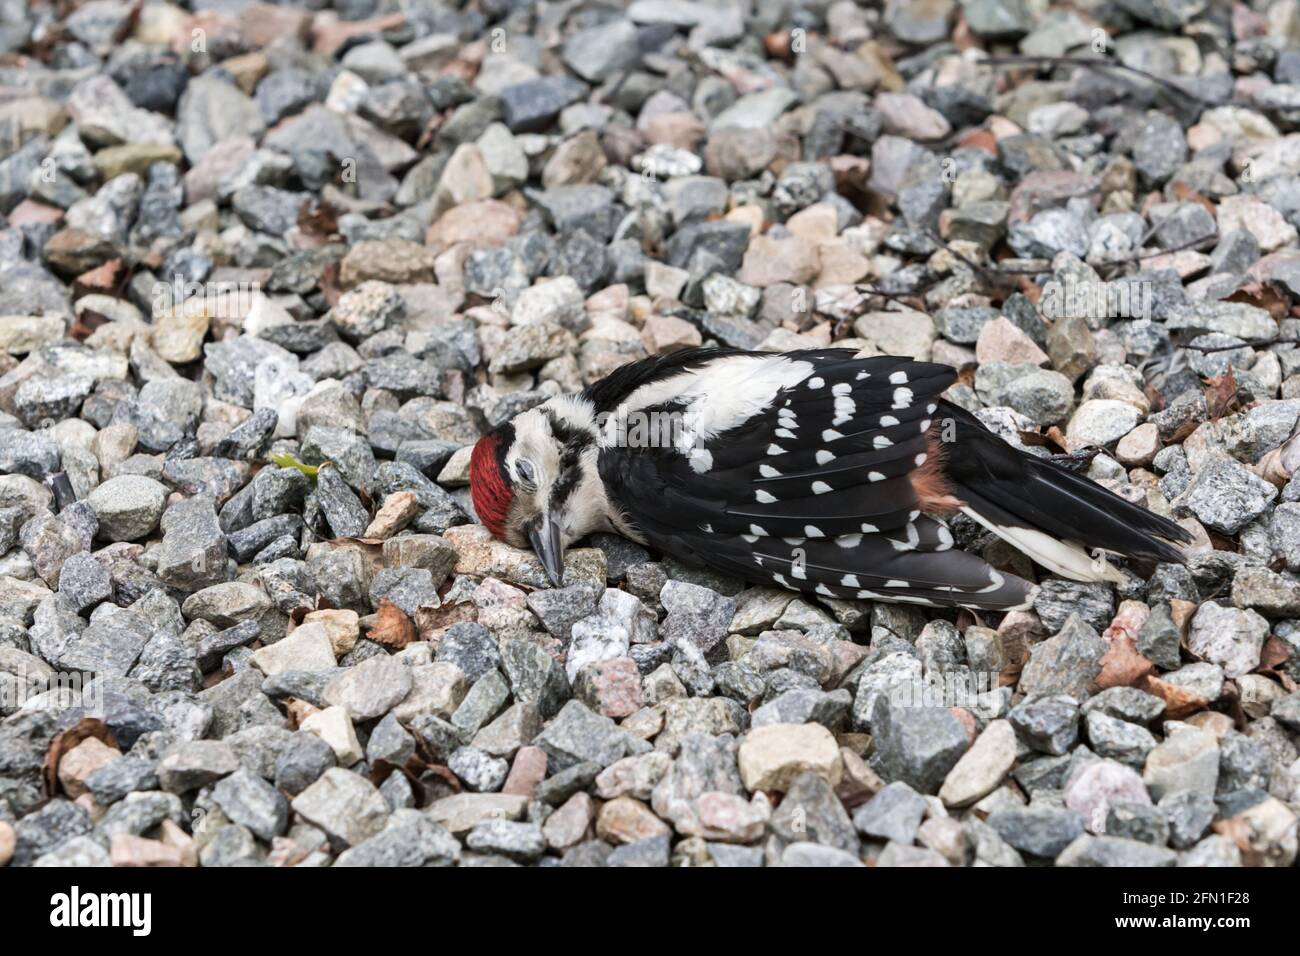 Dead Great spotted woodpecker Dendrocopos major on gravel drive. Killed after hitting domestic window. Stock Photo